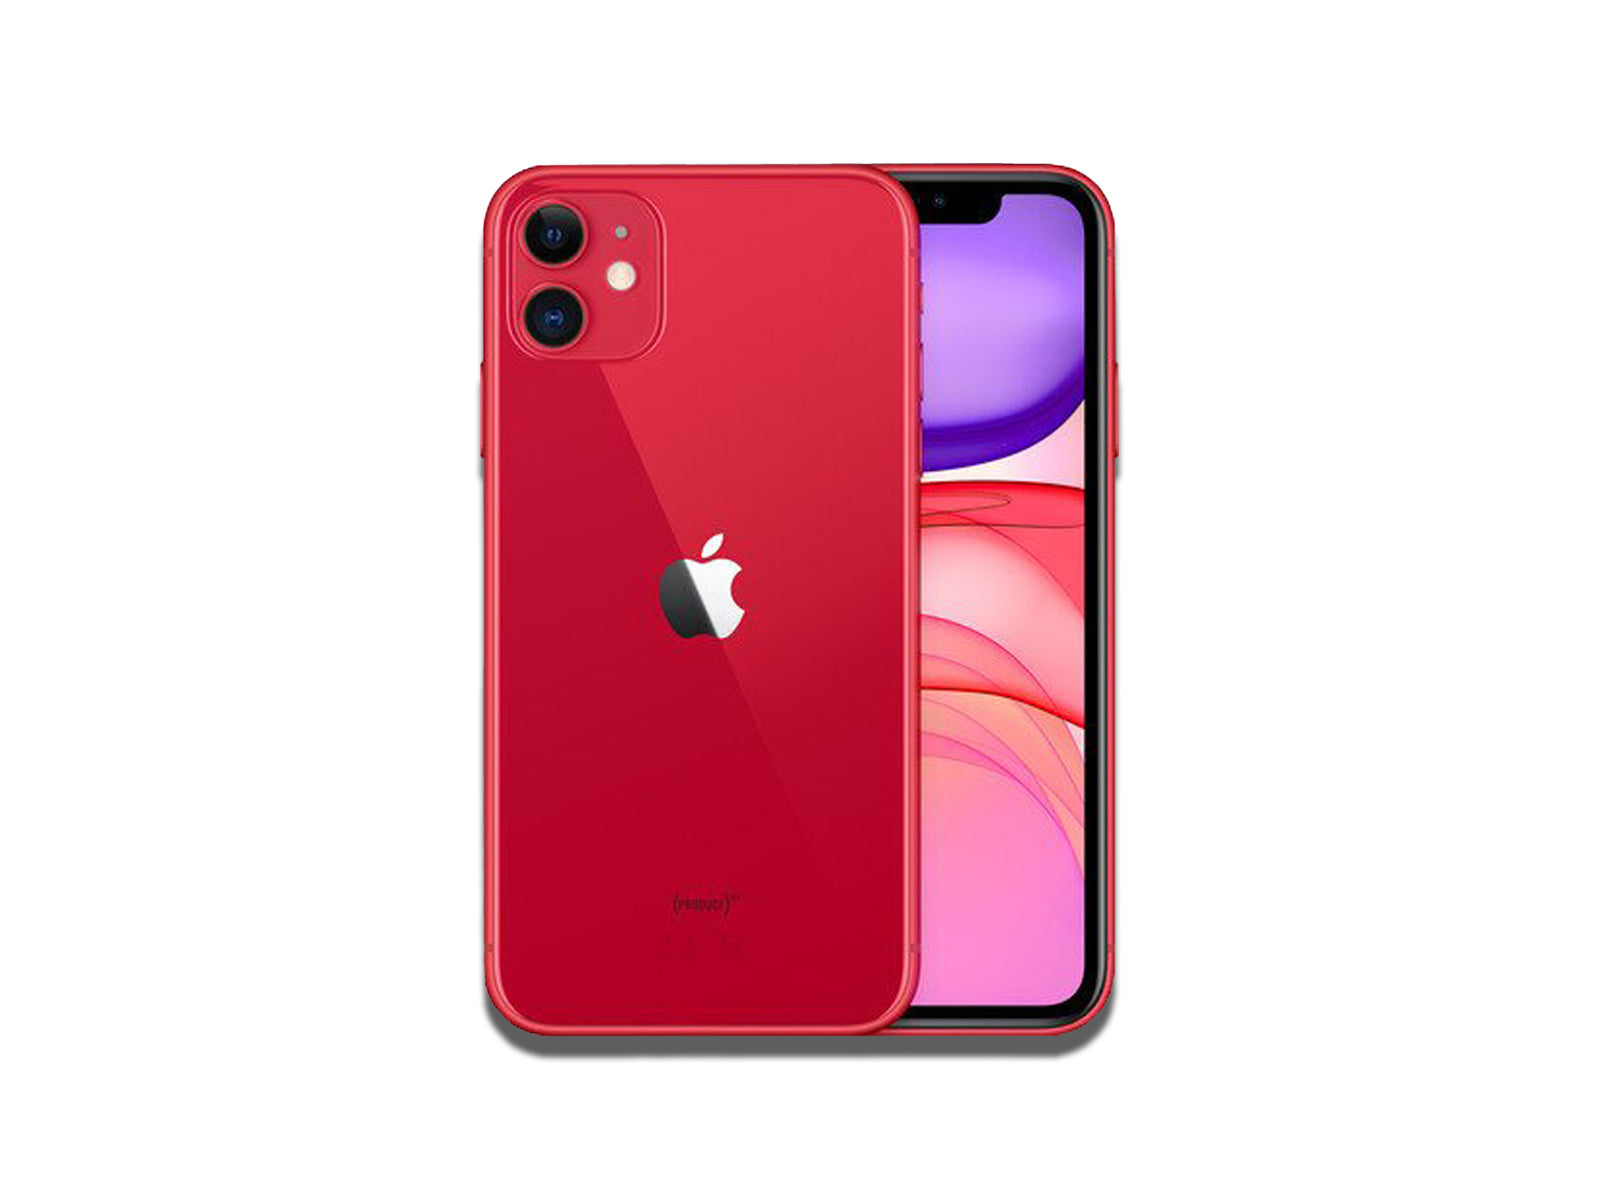 Apple iPhone 11 Red on the white background